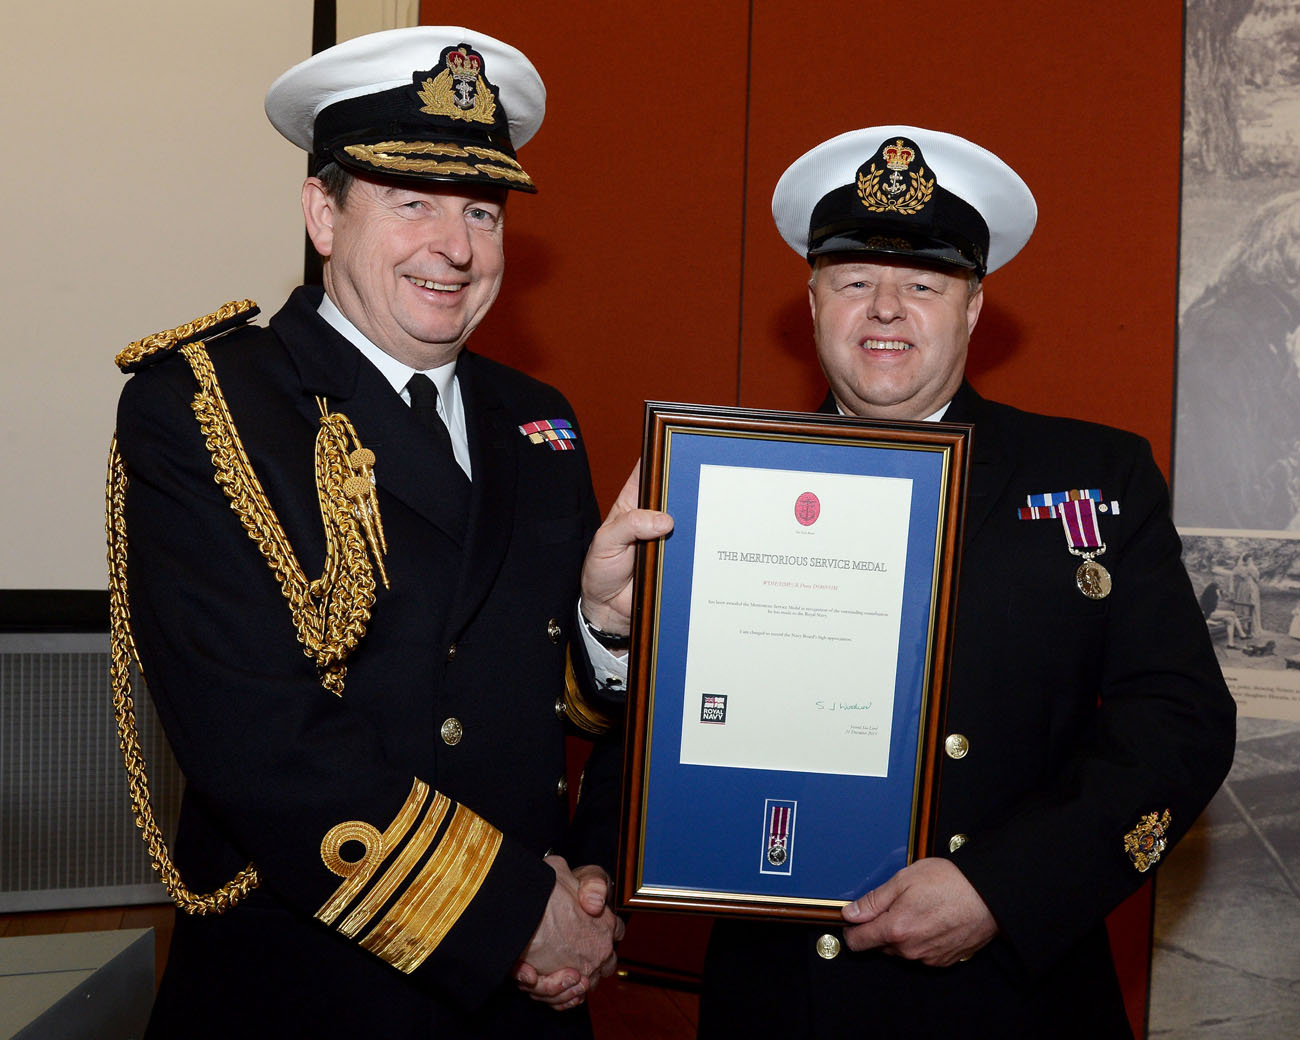 Plymouth Warrant Officer awarded Meritorious Service Medal | Royal Navy